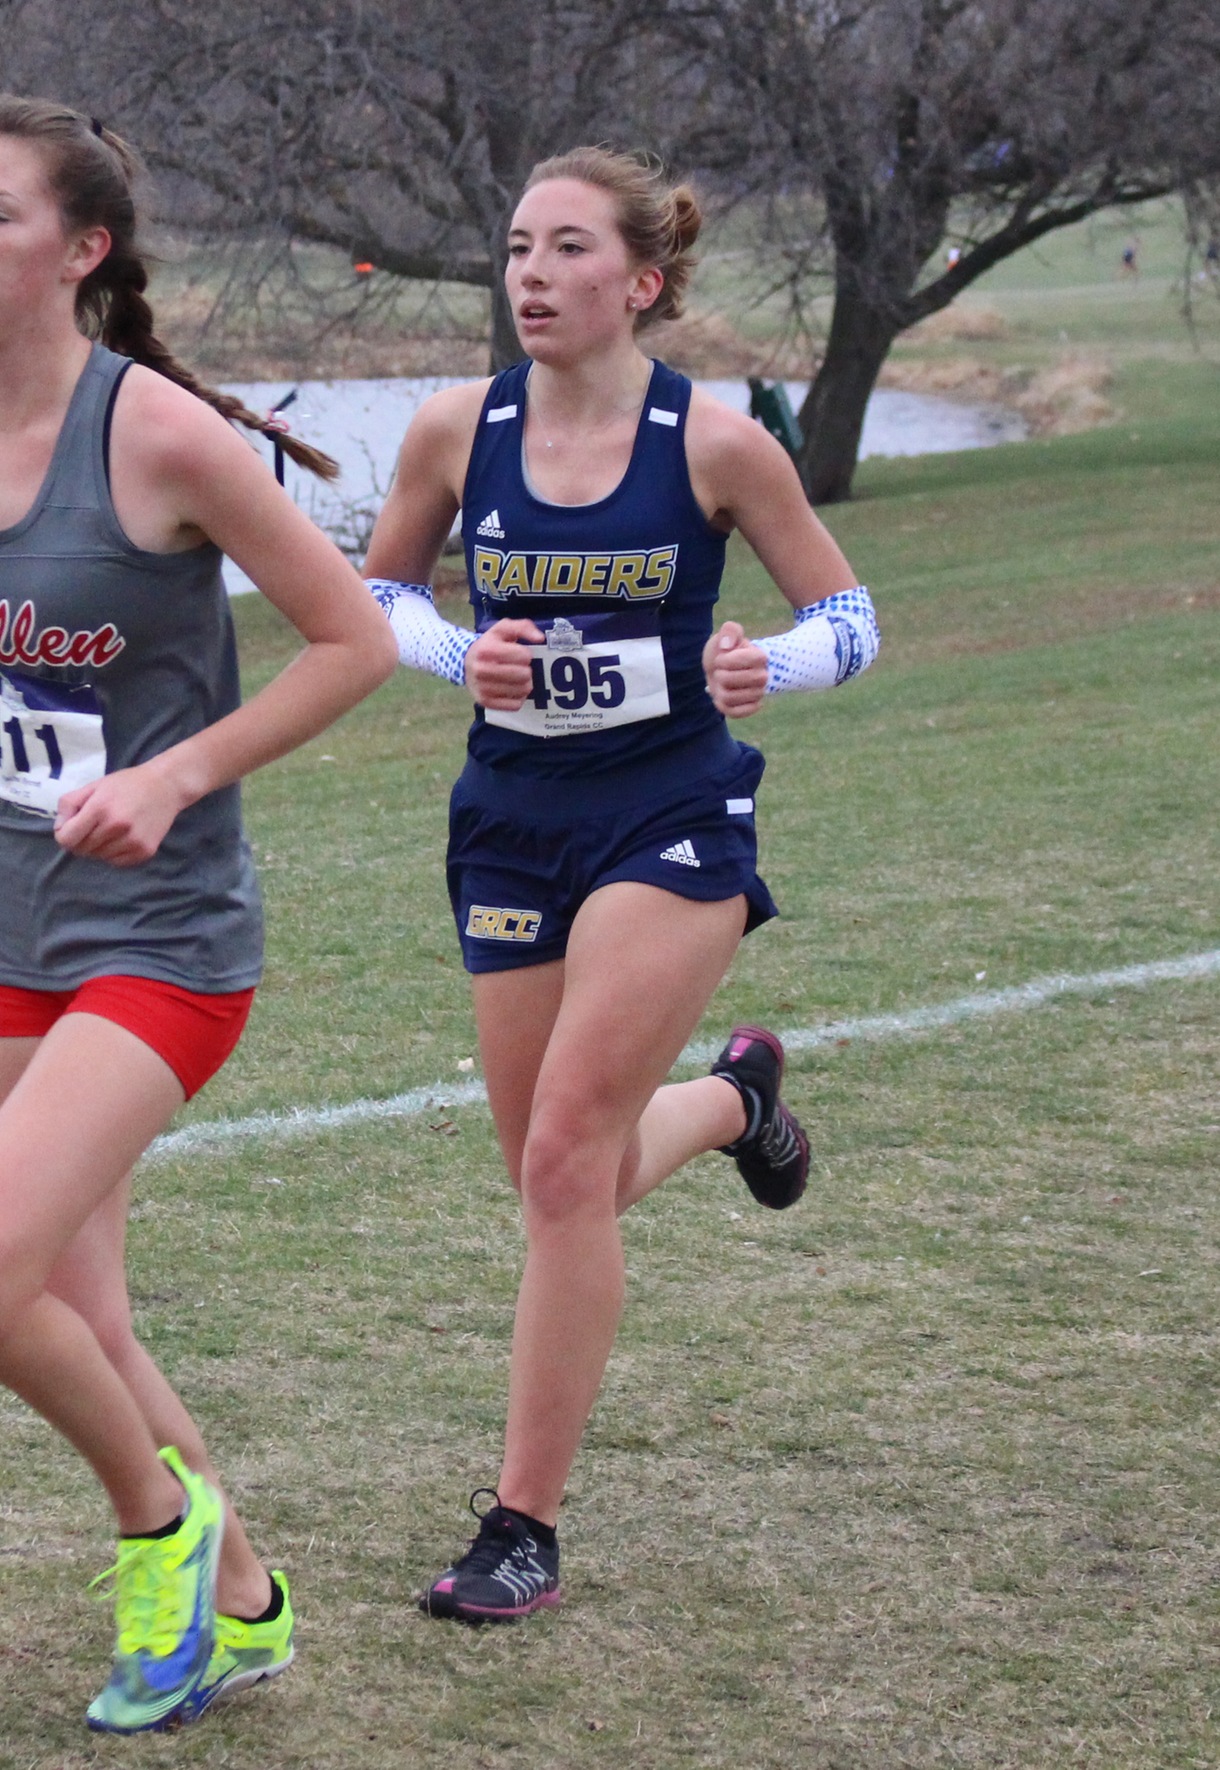 Grand Rapids' Audrey Meyering competes at the NJCAA Division II National Championship in Fort Dodge, IA.